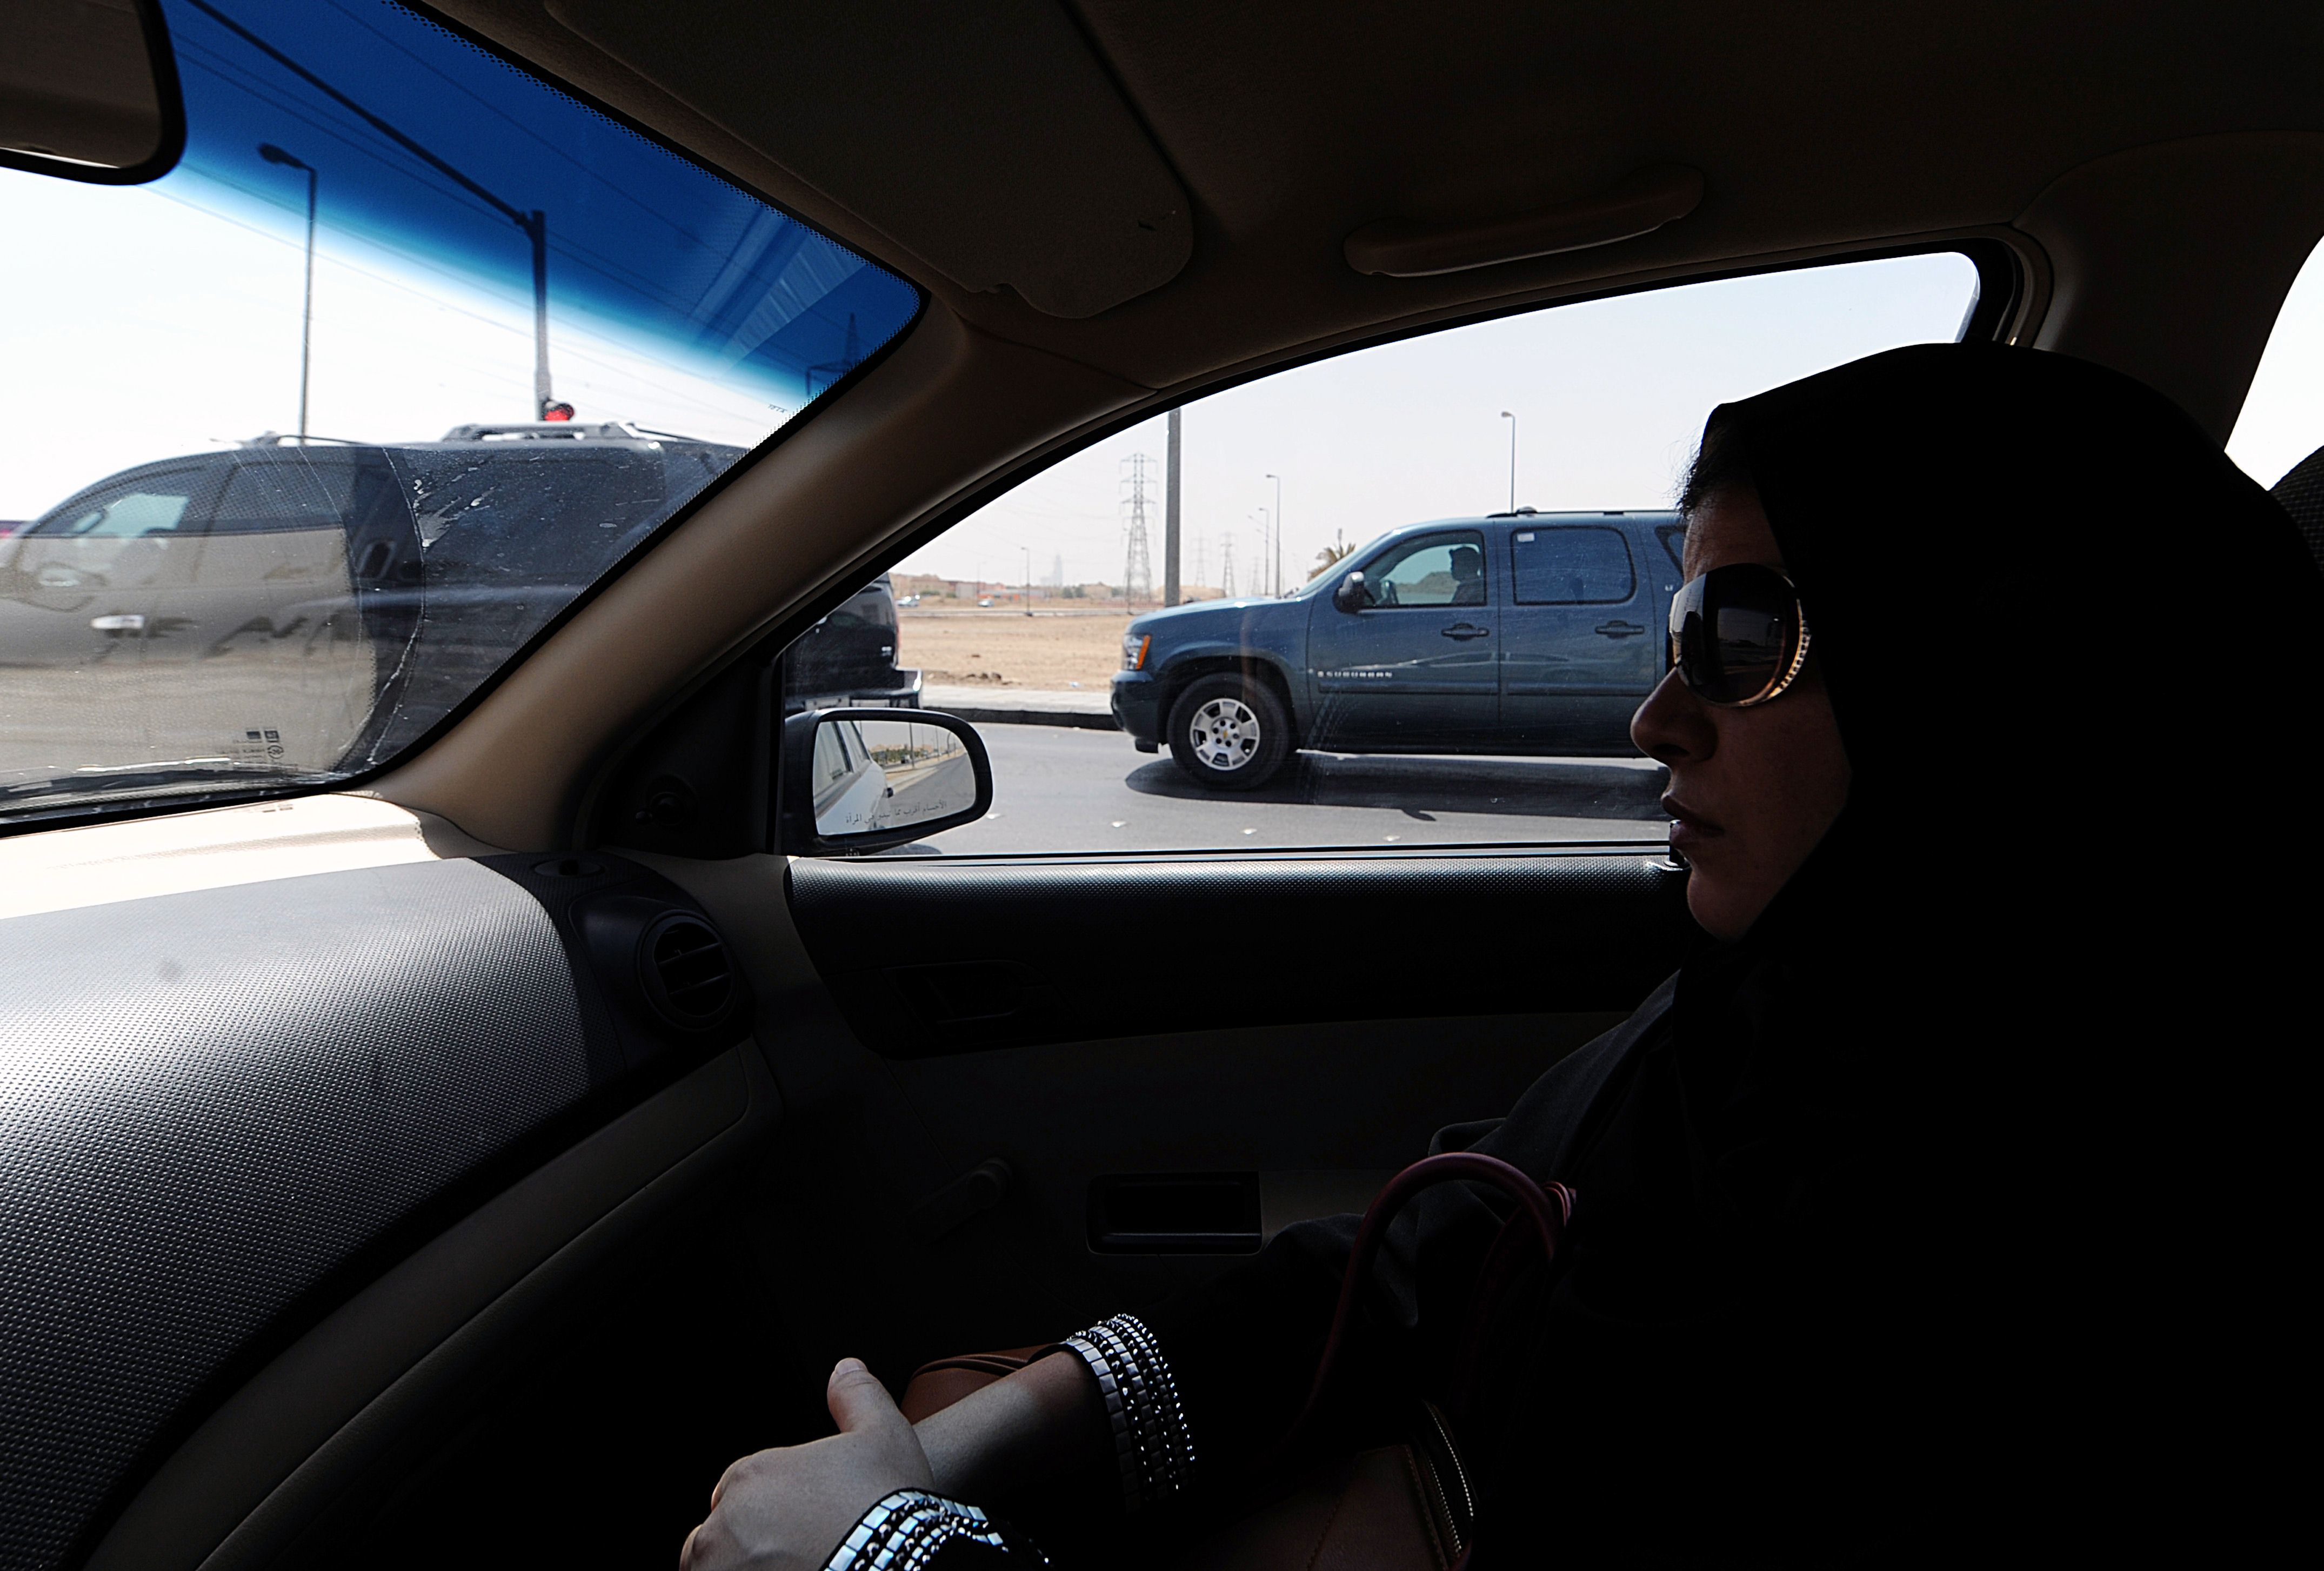 A Saudi woman sits in a vehicle as a passenger in Riyadh. A top cleric has said women who drive risk bearing children with clinical problems. Photo: AFP